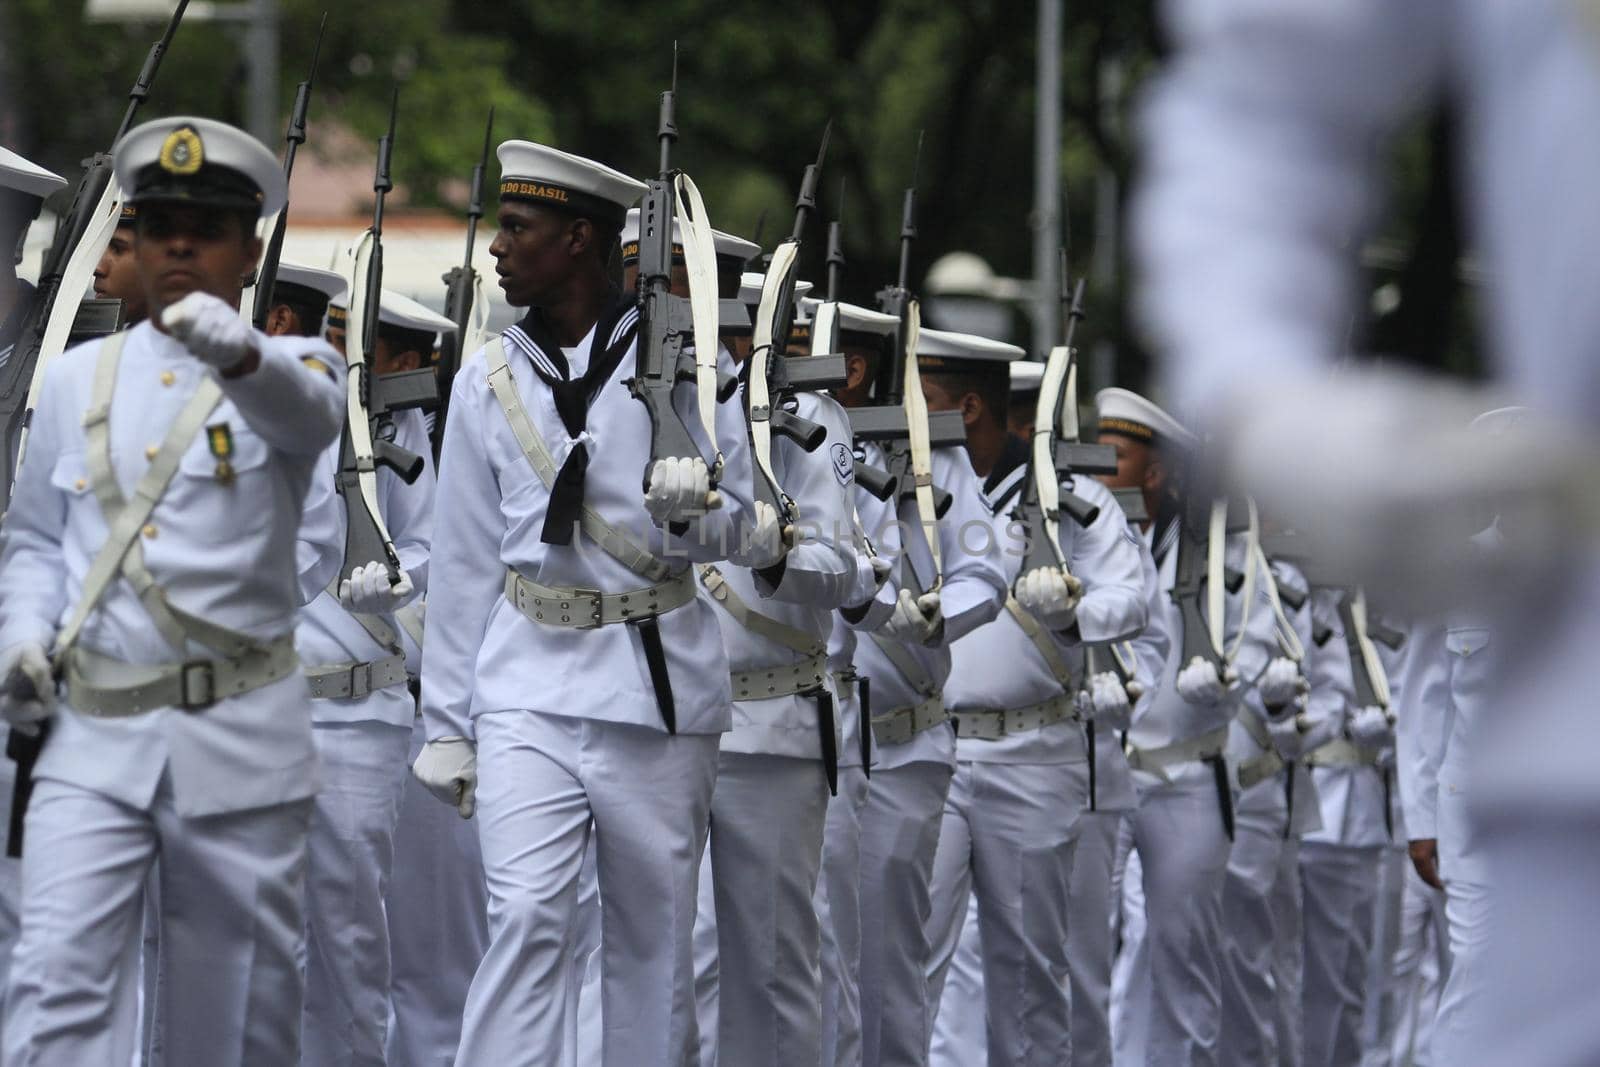 salvador, bahia, brazil - september 7, 2014: Brazilian Navy military personnel are seen during a military parade celebrating the independence of Brazil in the city of Salvador.